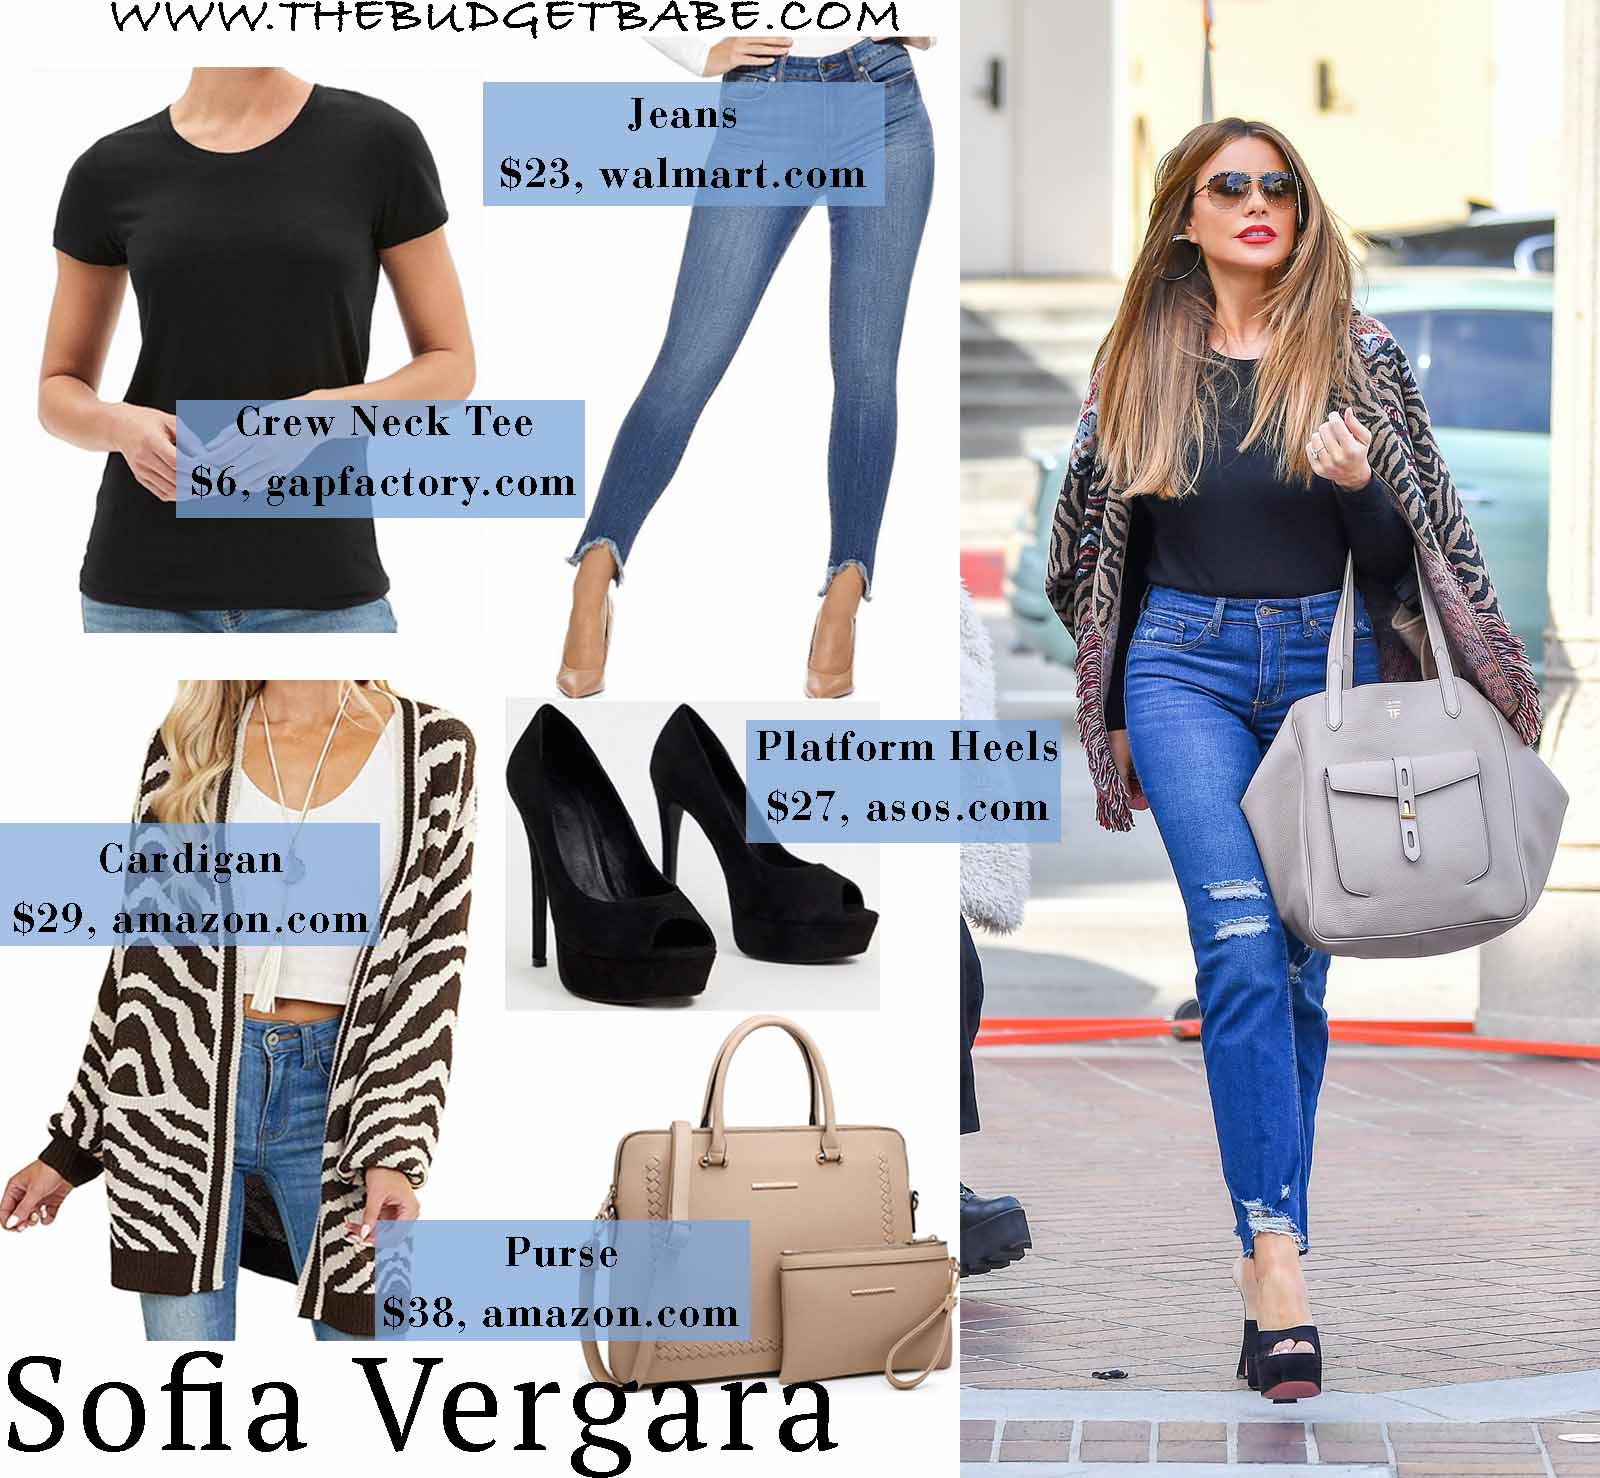 Sofia is chic in a cardigan and jeans.